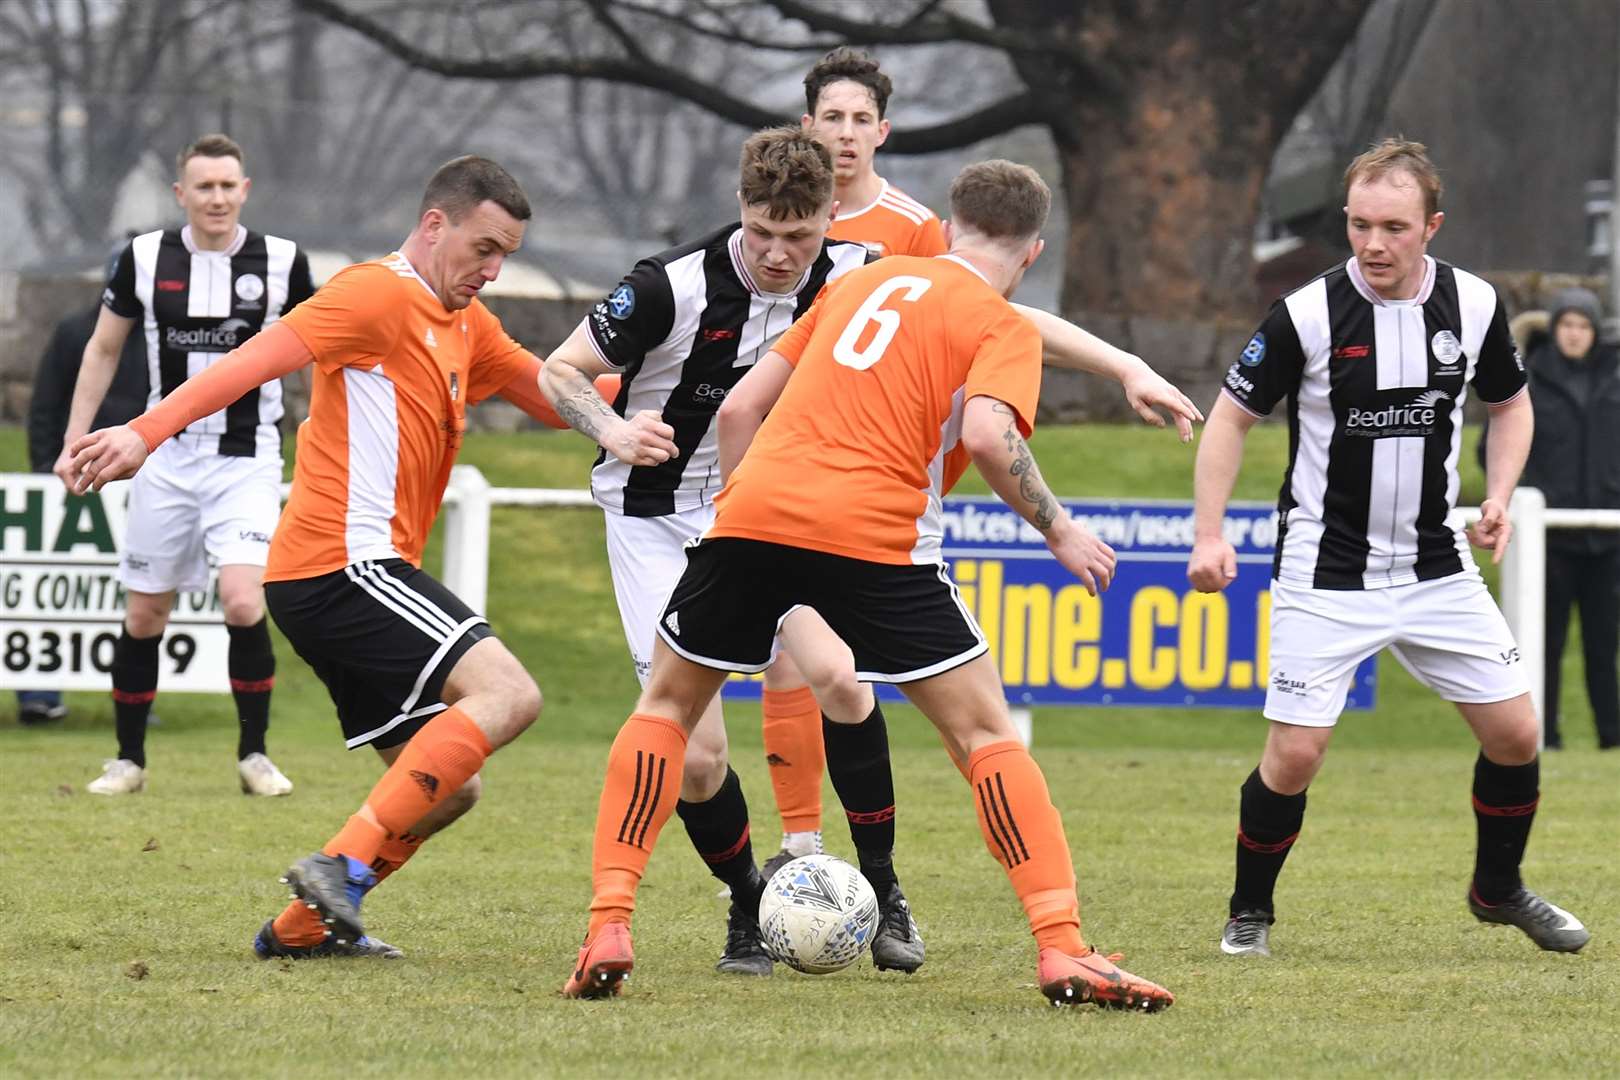 Trialist Jakob Koziol on the ball for Academy against Rothes at Mackessack Park on Saturday. Gary Manson and Richard Macadie are the Wick players looking on. Picture: Bob Roger